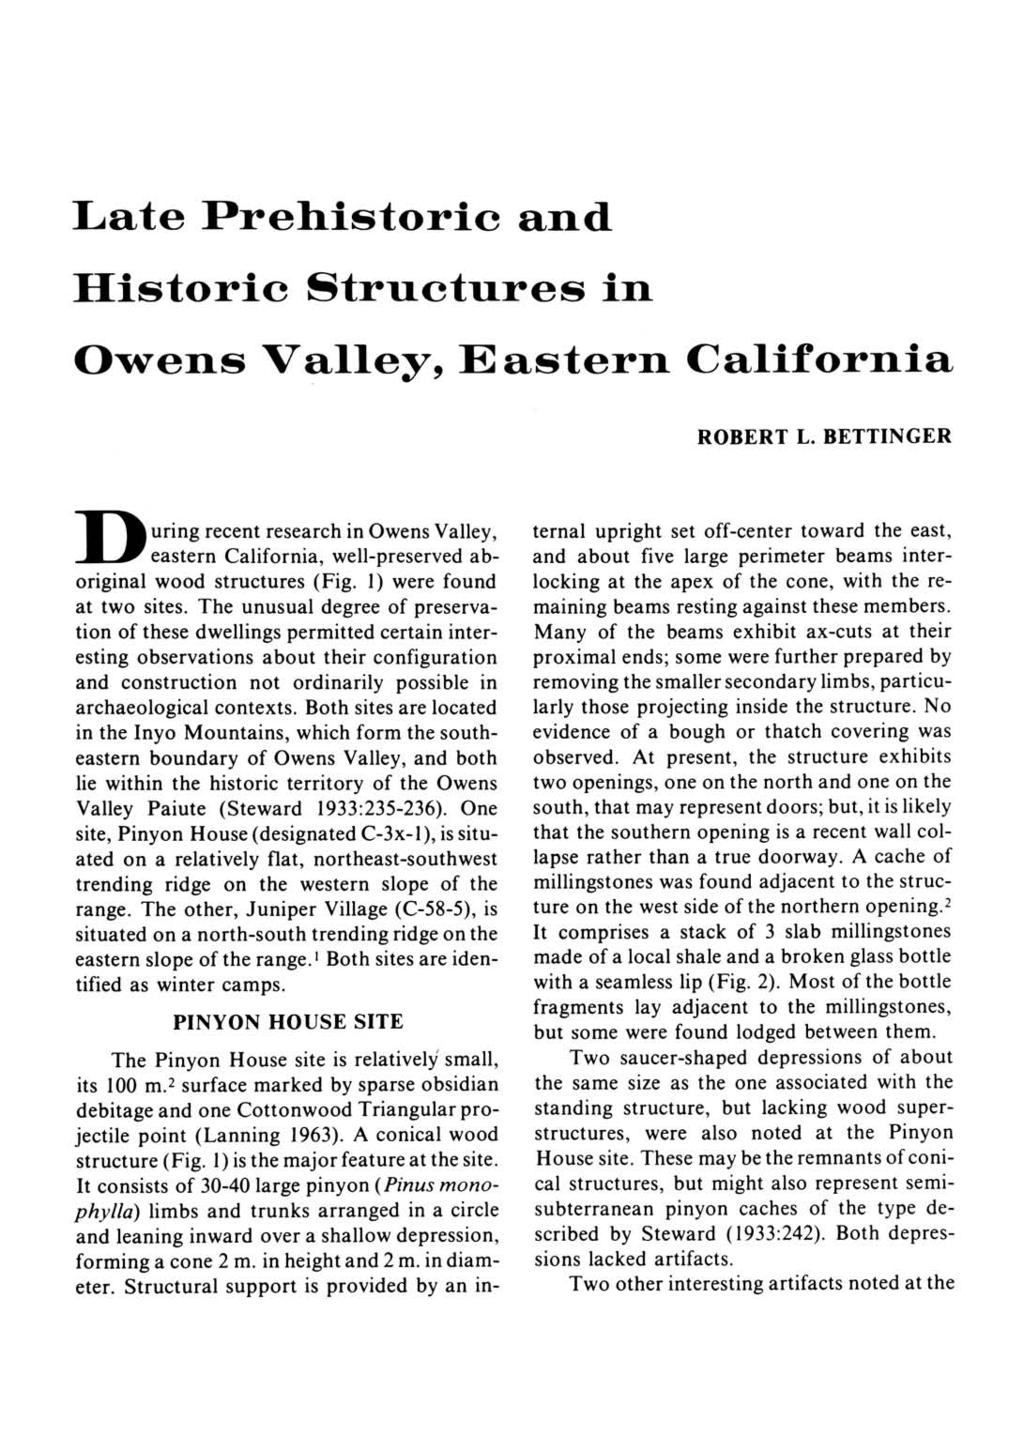 Late Prehistoric and Historic Strnctures in Owens Valley, Eastern California ROBERT L.